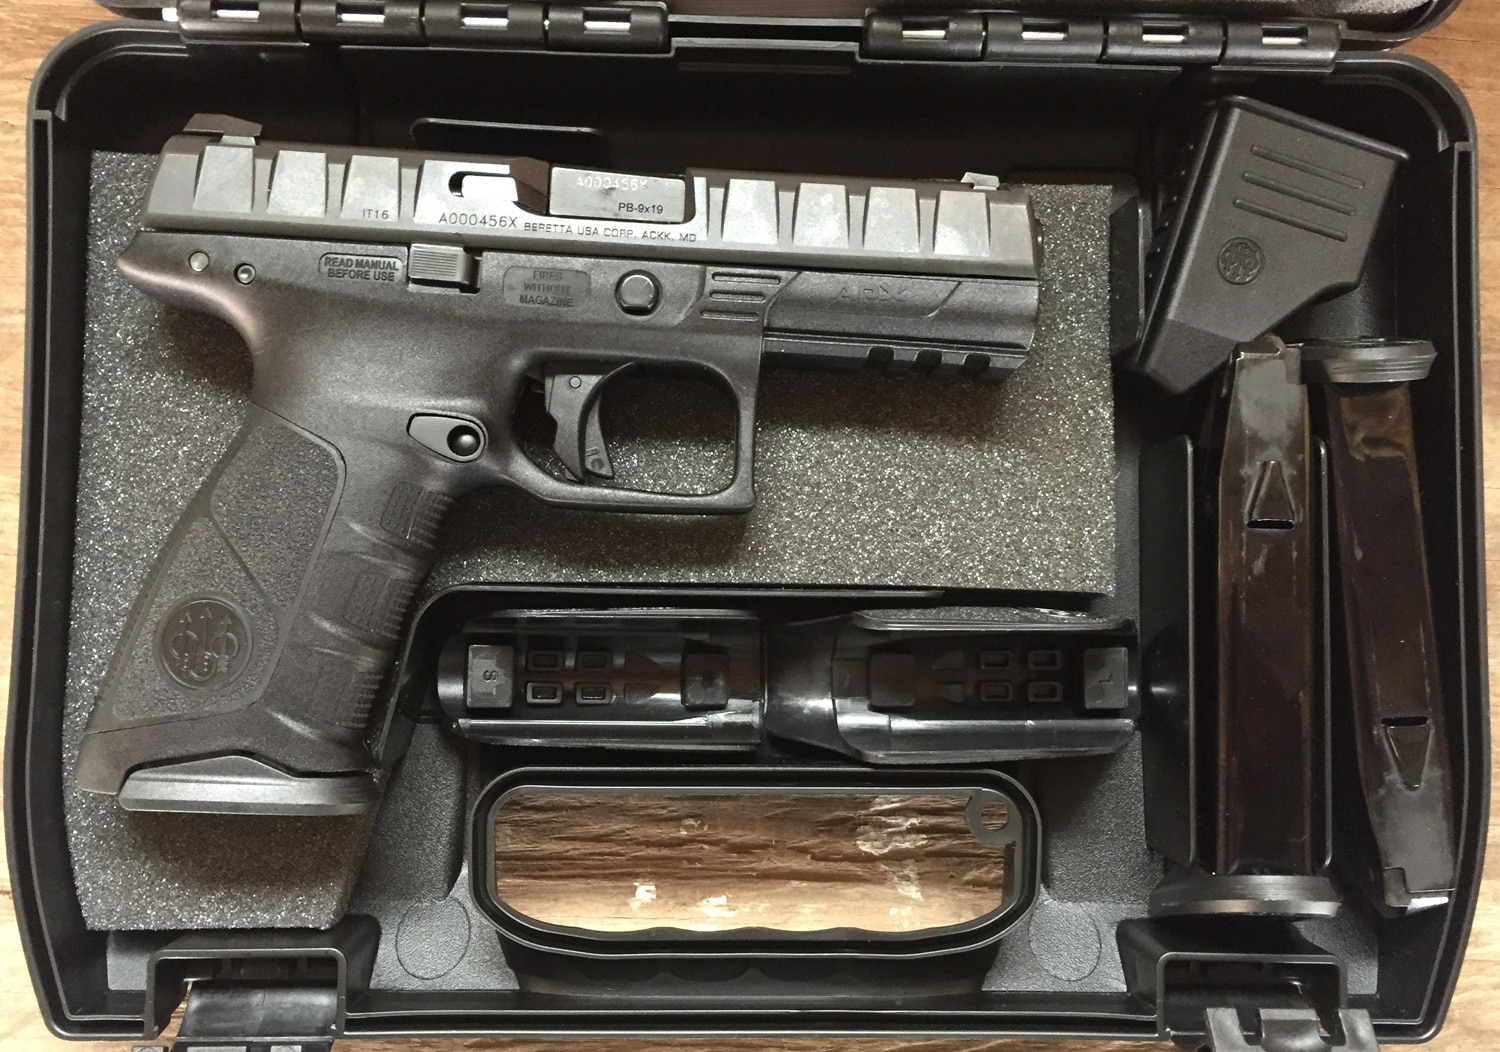 Off the shelf, the APX comes with two 17-round magazines, two interchangeable grips and a mag loader. (Photo: Daniel Terrill/Guns.com)